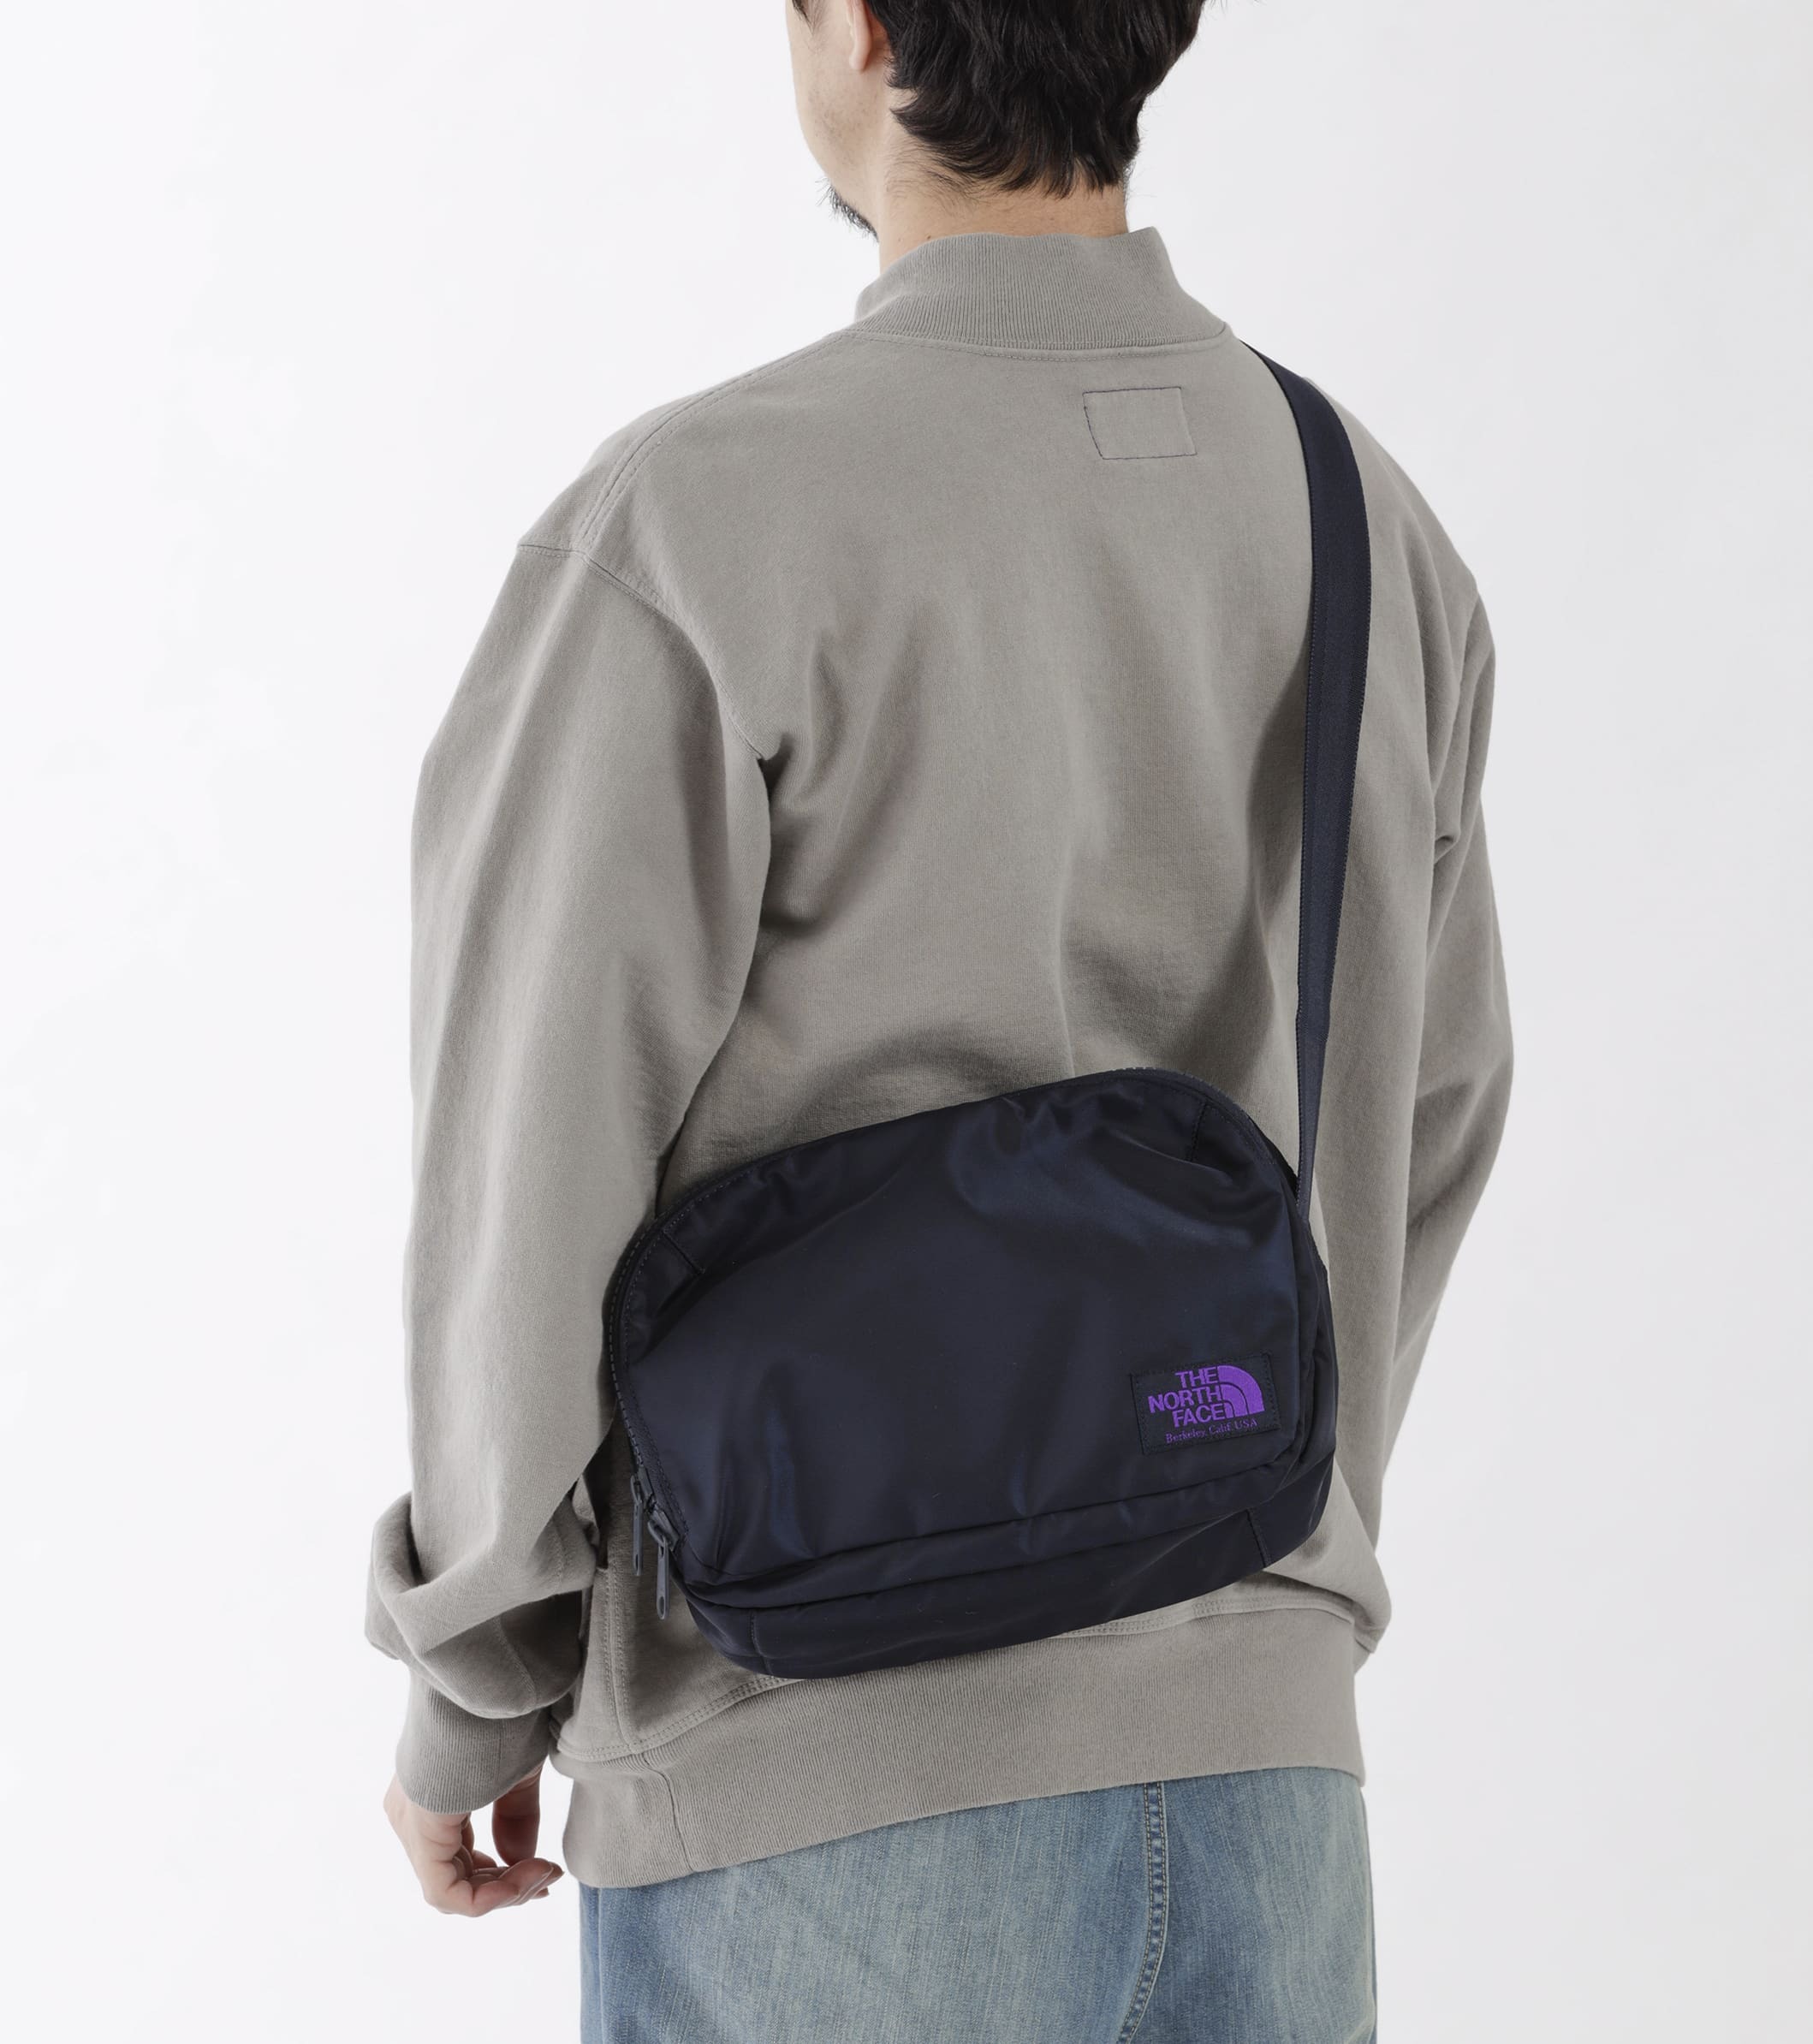 AUTHENTIC THE NORTH FACE PURPLE LABEL 